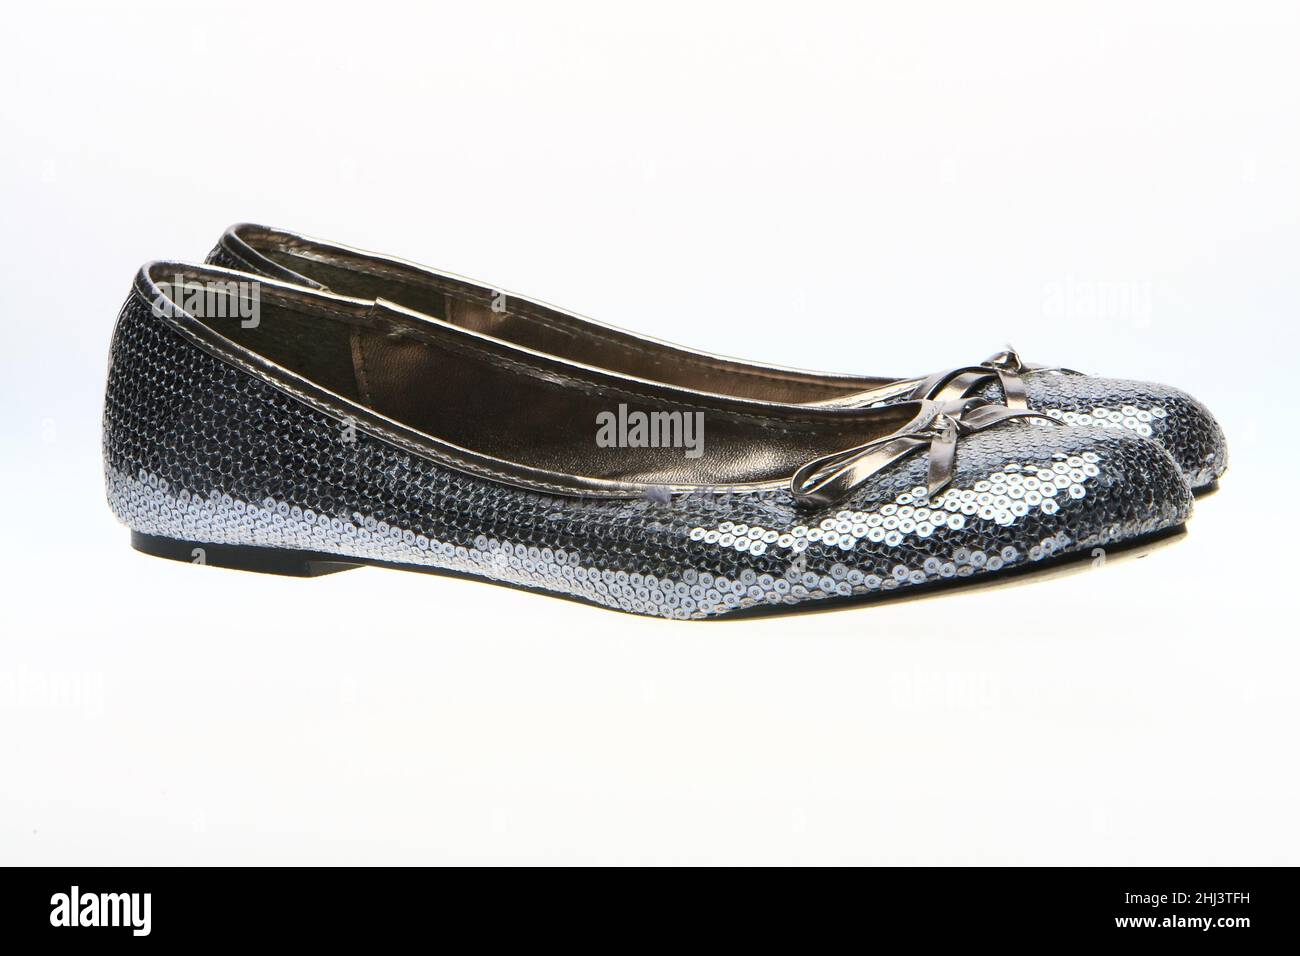 Woman’s shoes shot on a white background Stock Photo